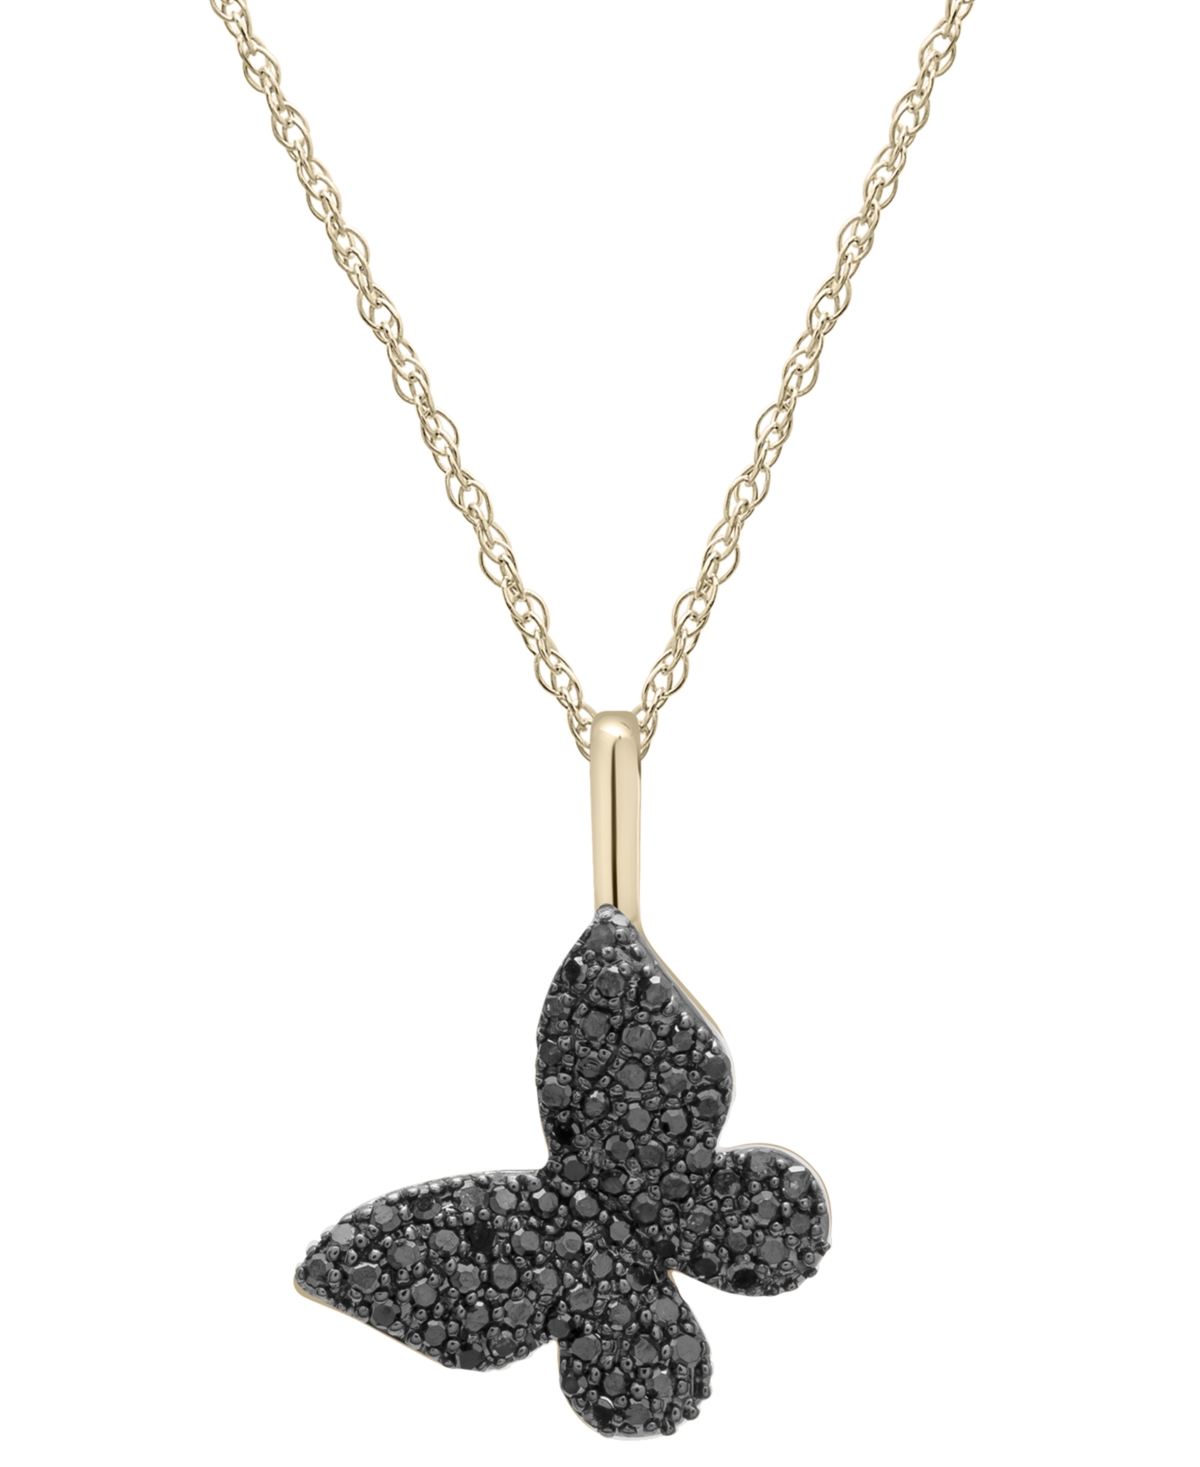 Diamond Butterfly Pendant Necklace (1/6 ct. t.w.) in 14k Gold (Also Available in Black Diamond) - Black Diamond